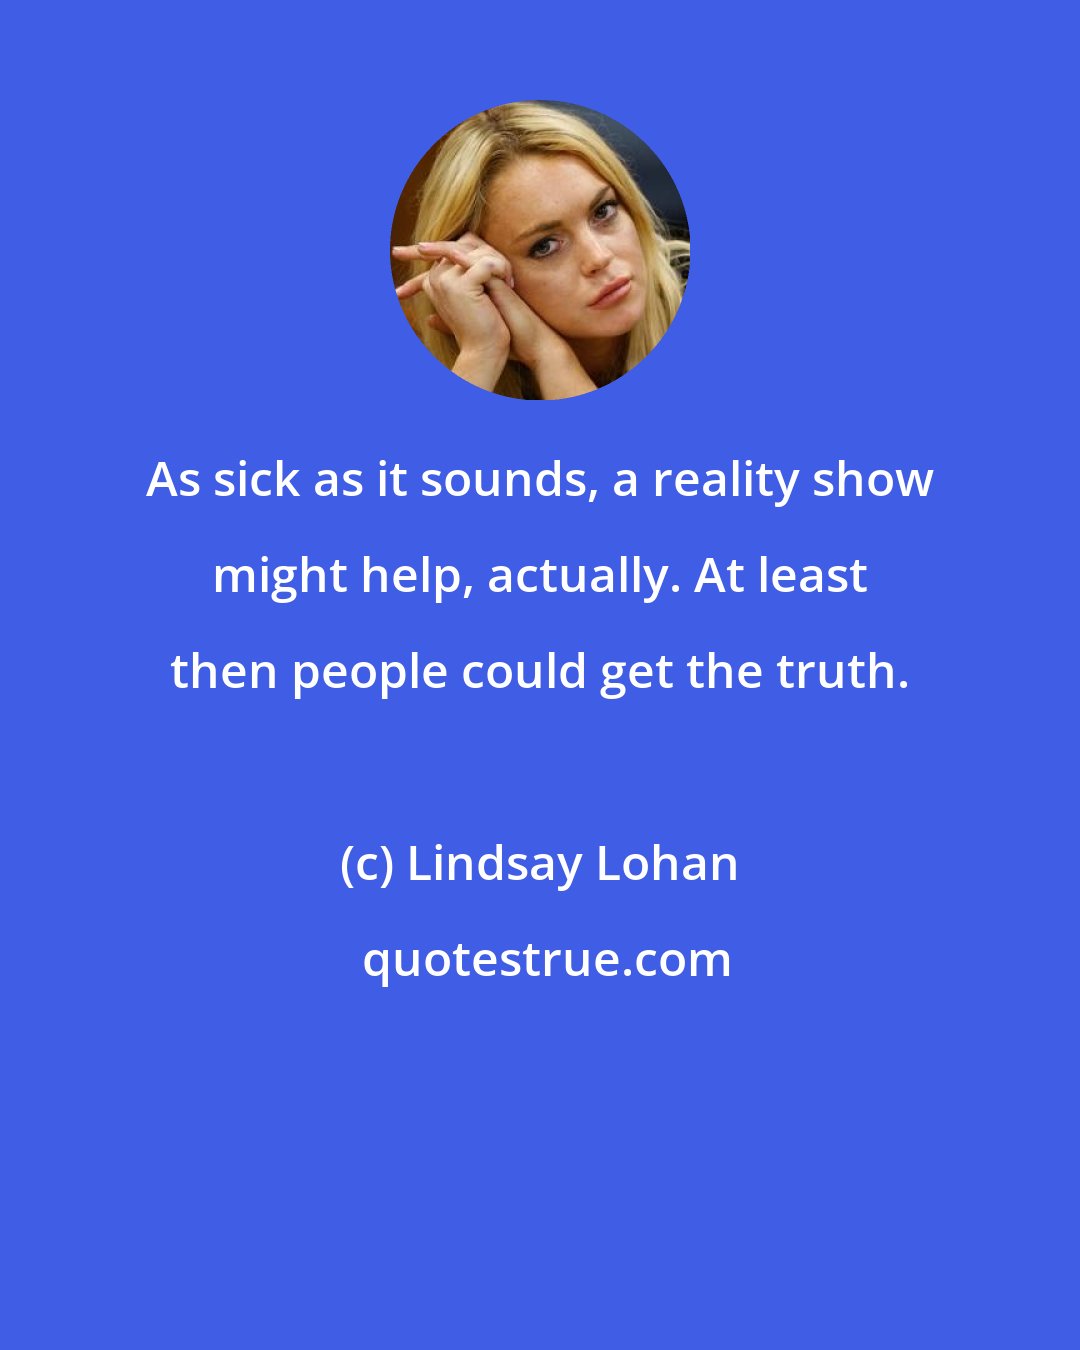 Lindsay Lohan: As sick as it sounds, a reality show might help, actually. At least then people could get the truth.